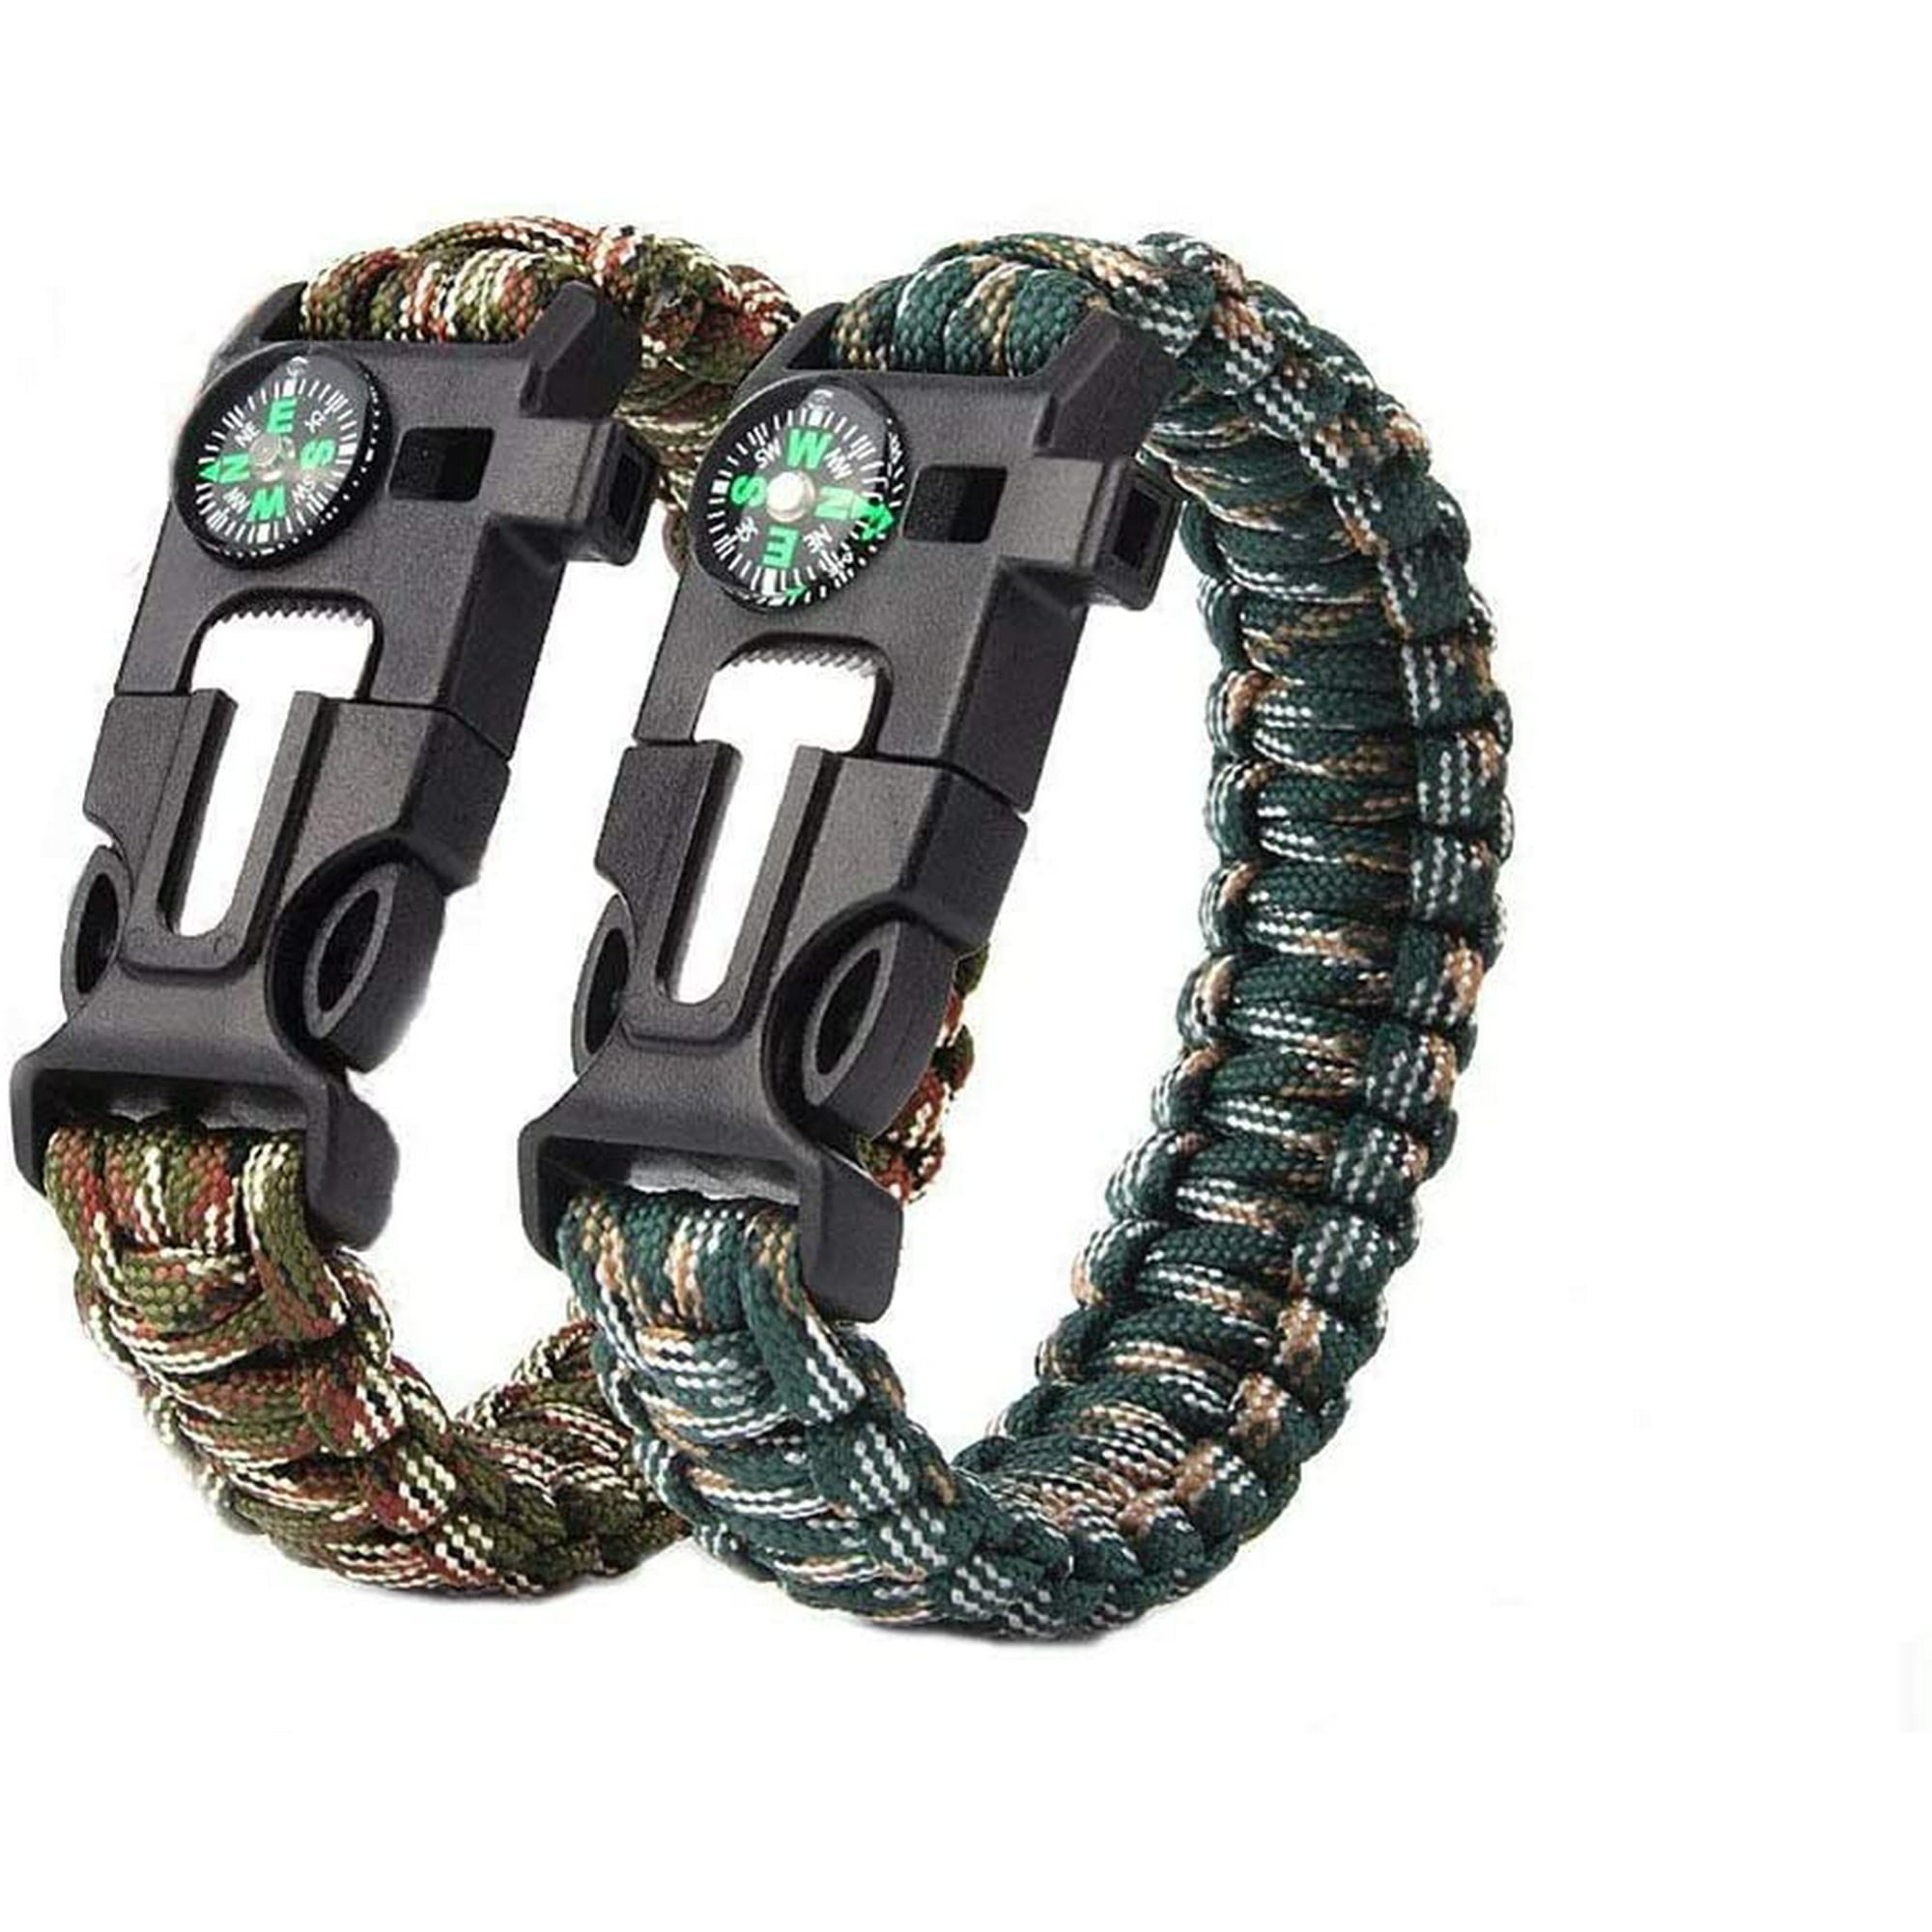 Outdoor Survival Paracord Bracelet Flint Whistle Compass Camping 5 in 1 Kit